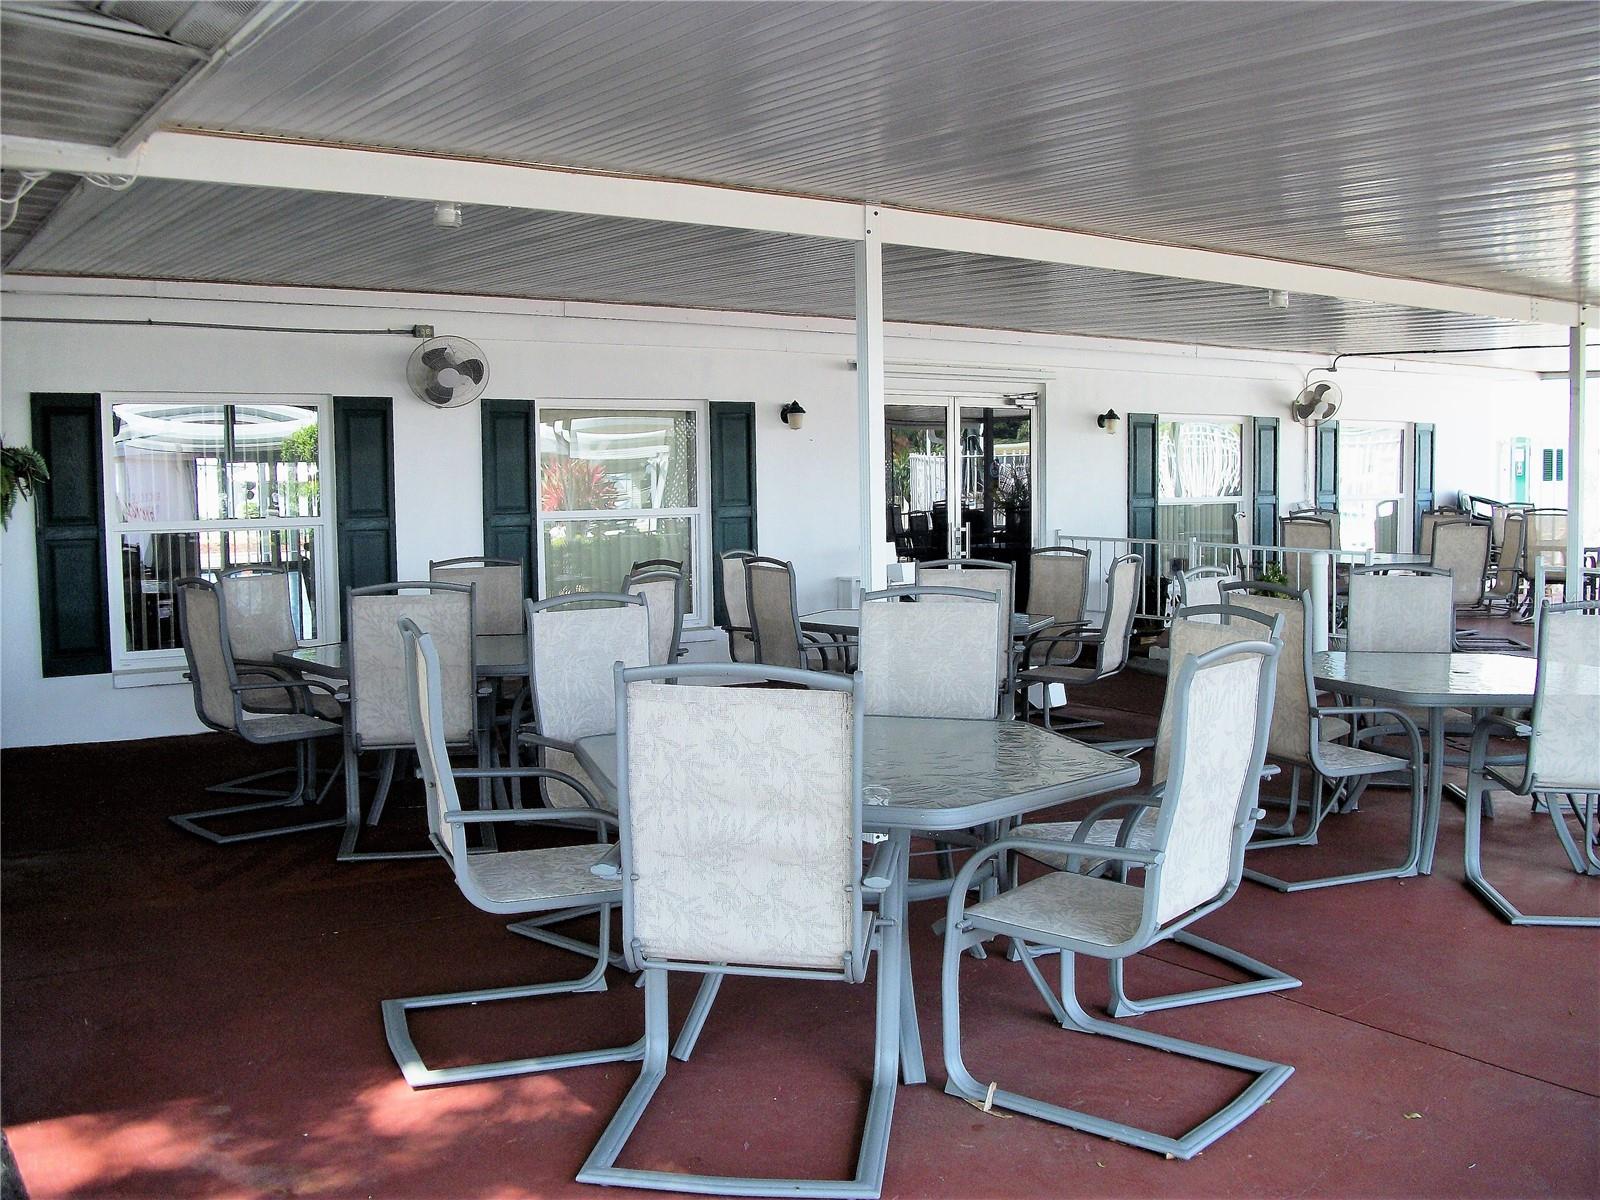 Patio on back side of clubhouse is great spot for socializing or hosting outdoor events.